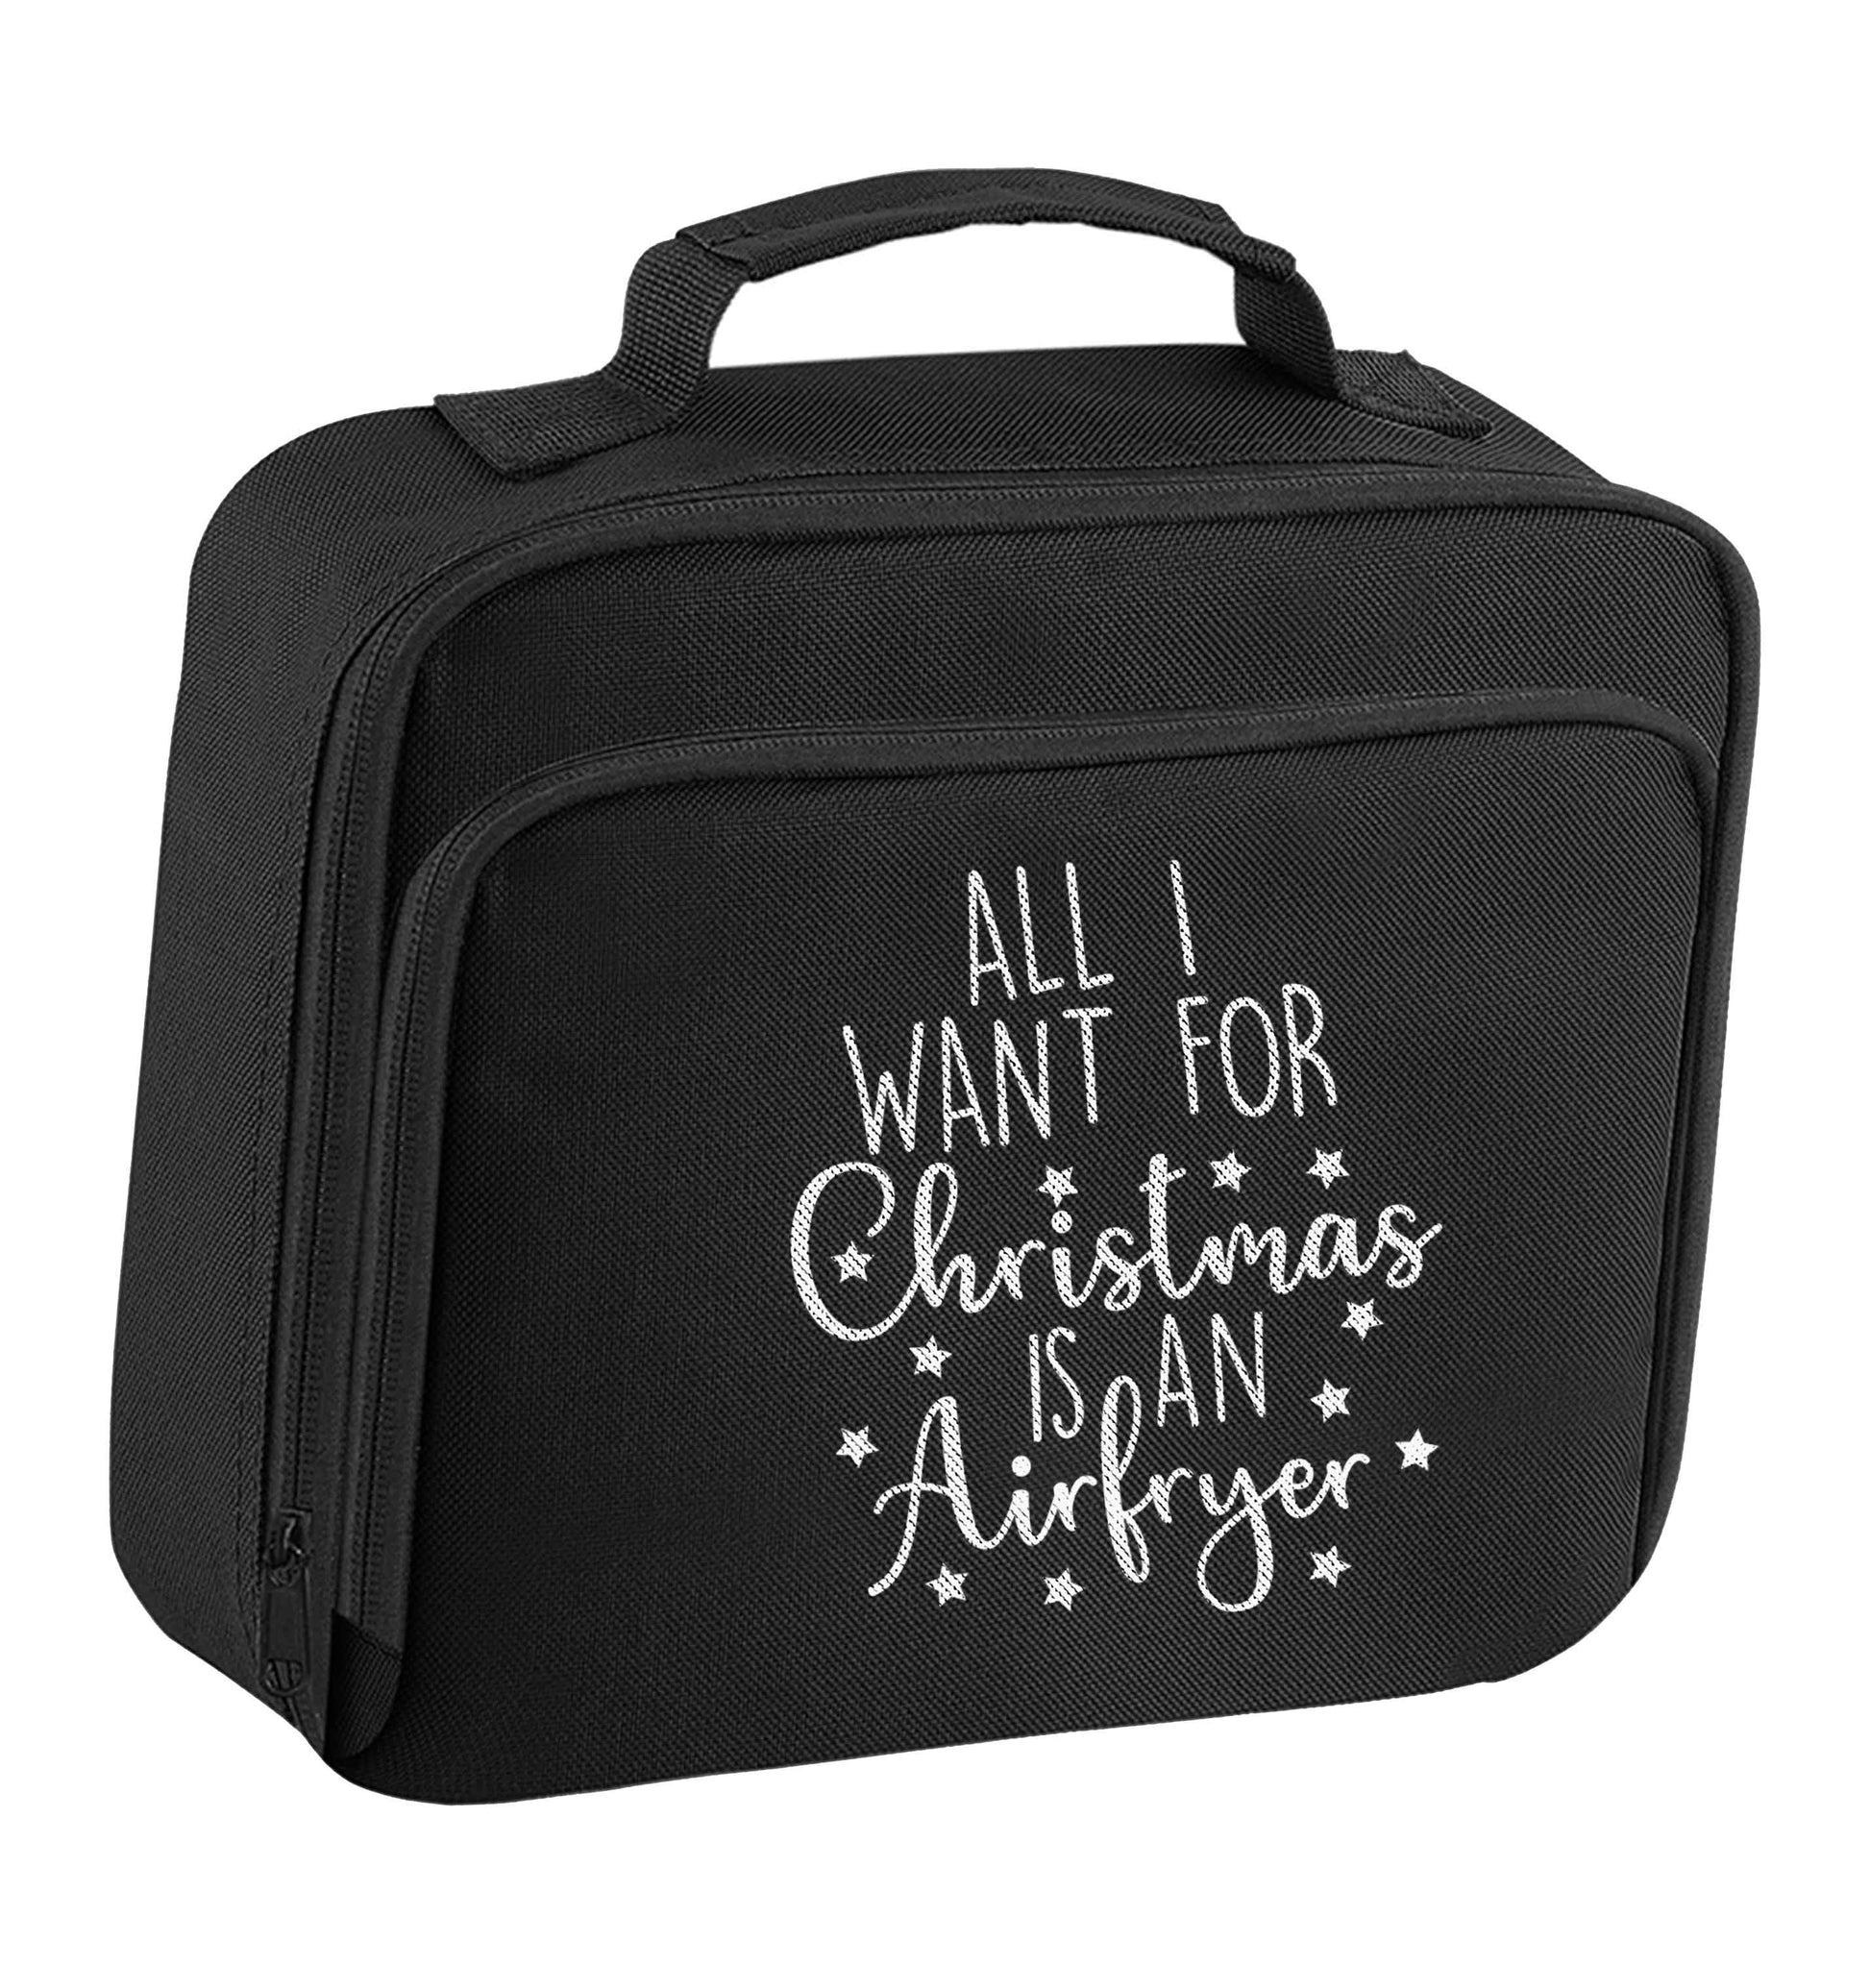 All I want for Christmas is an airfryerinsulated black lunch bag cooler